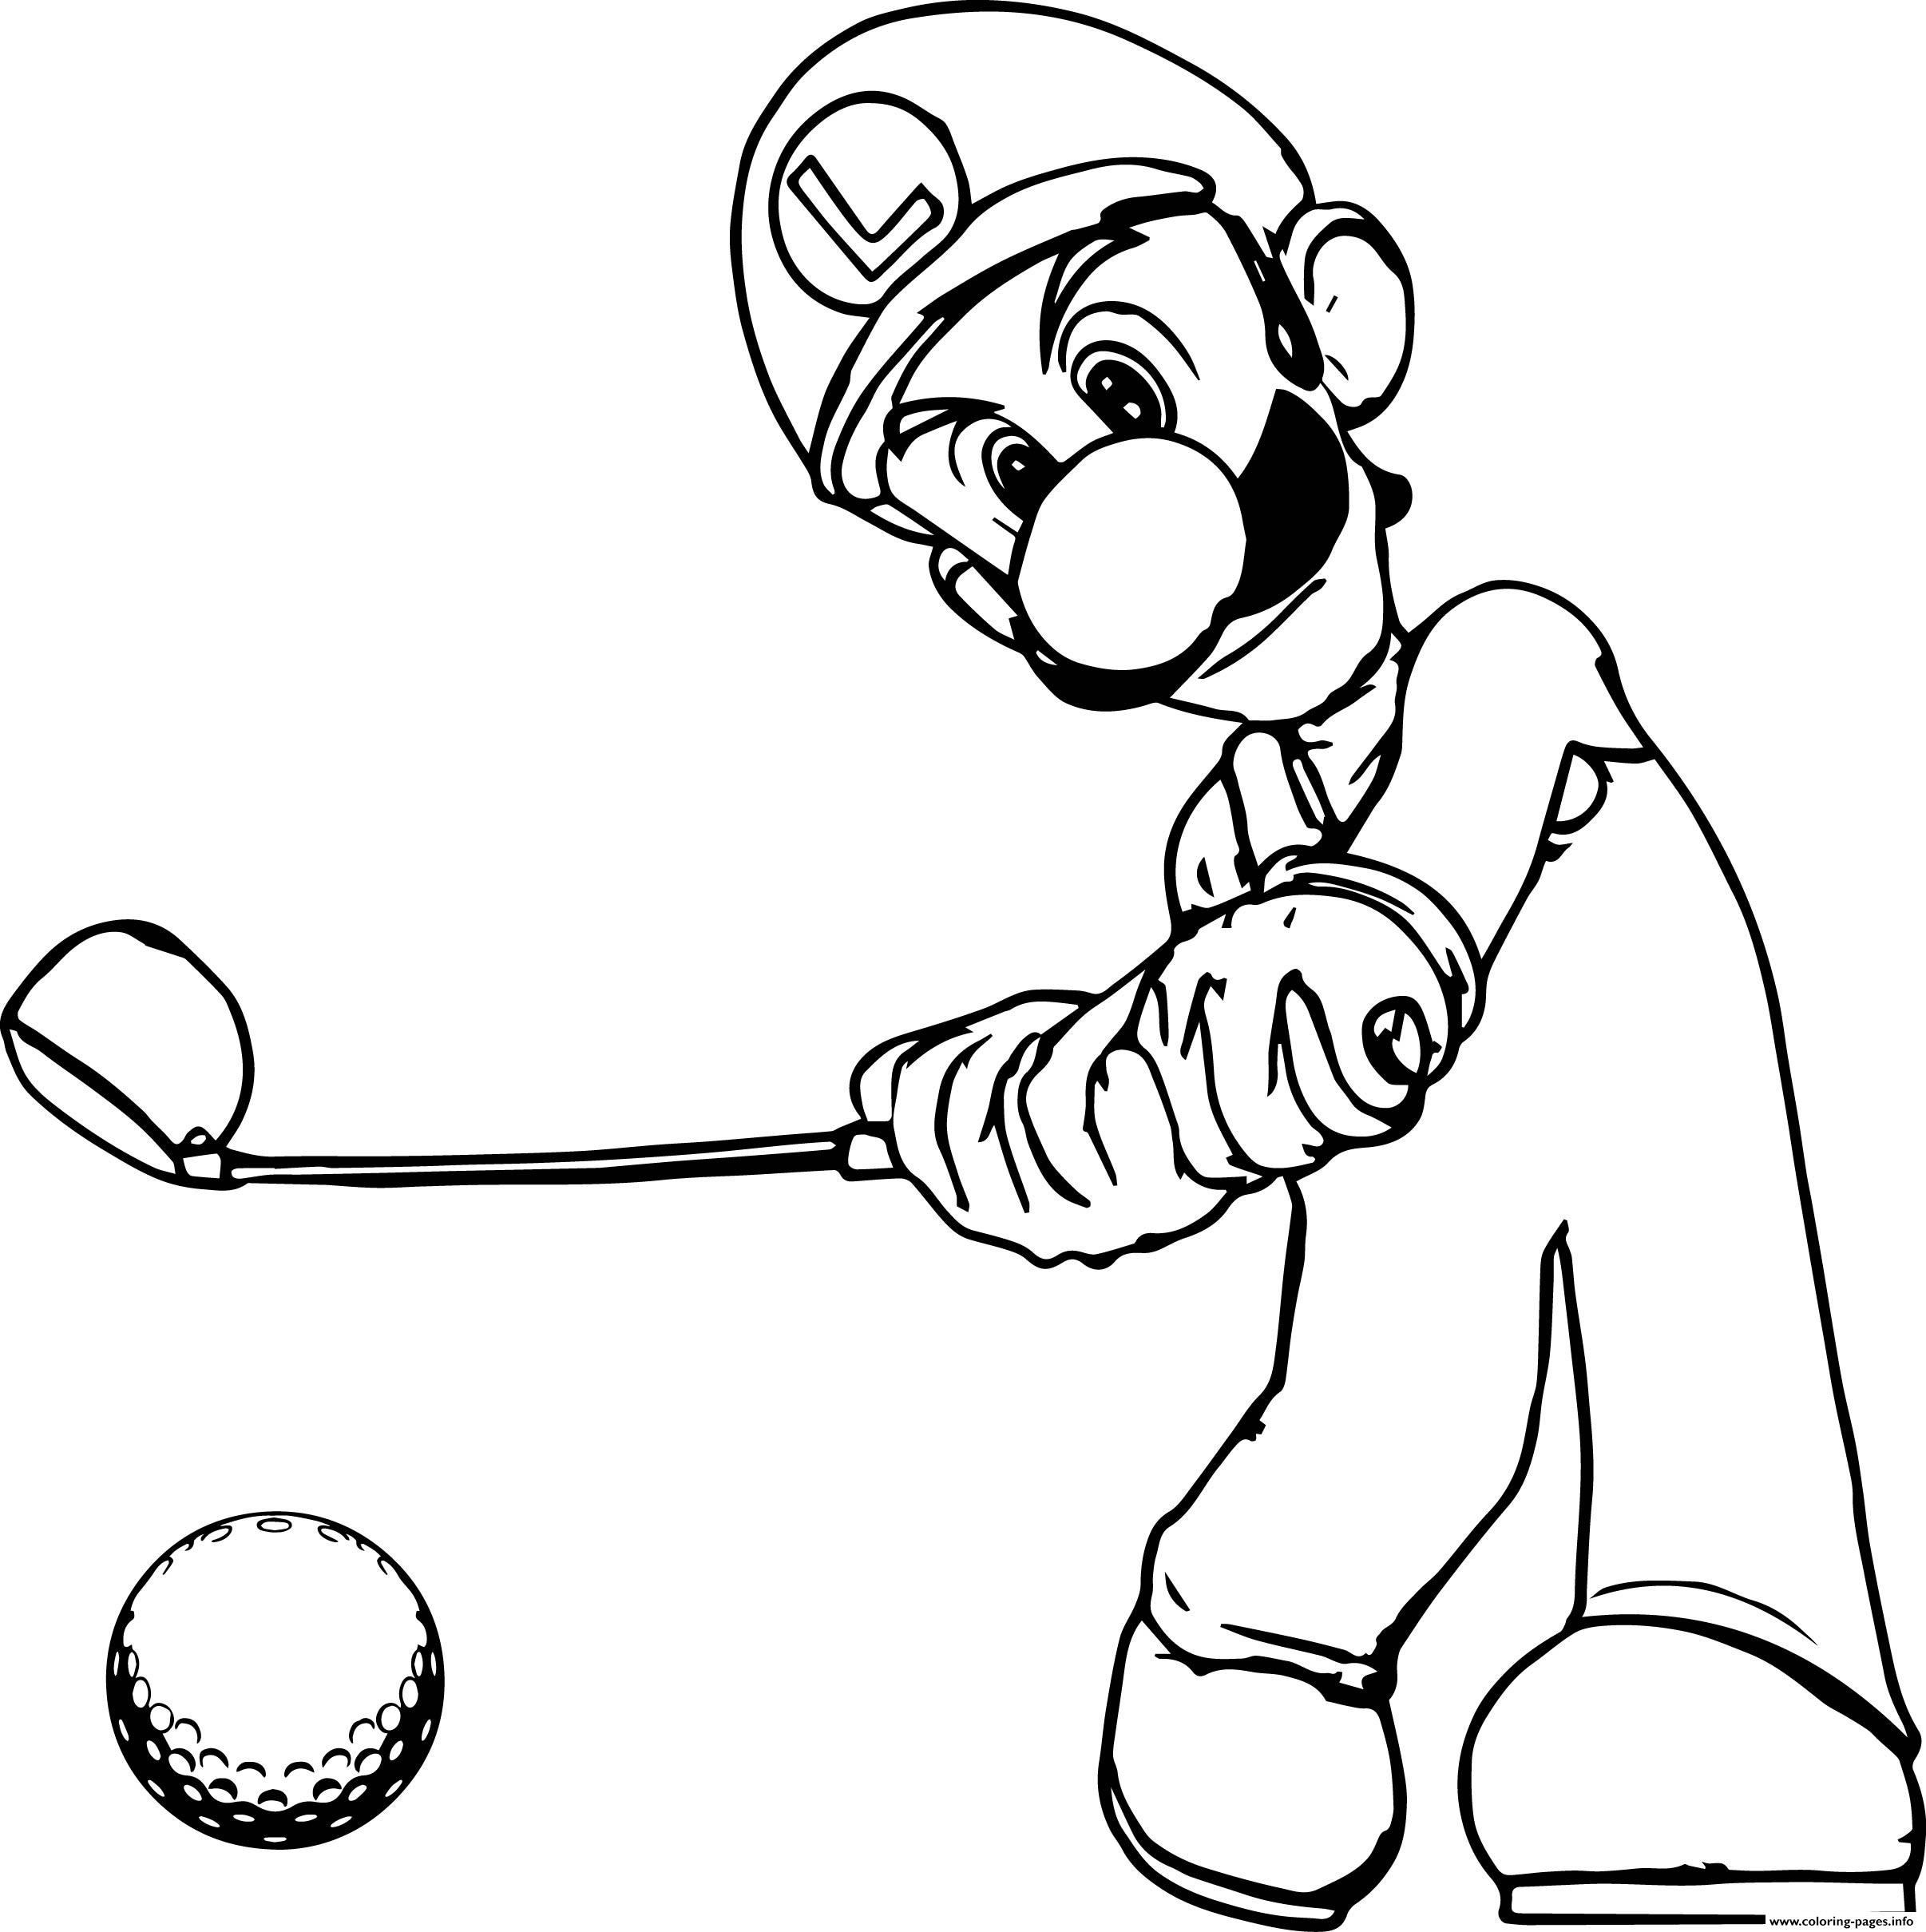 Coloring pages mario luigi golf coloring sheetd pages super printable free